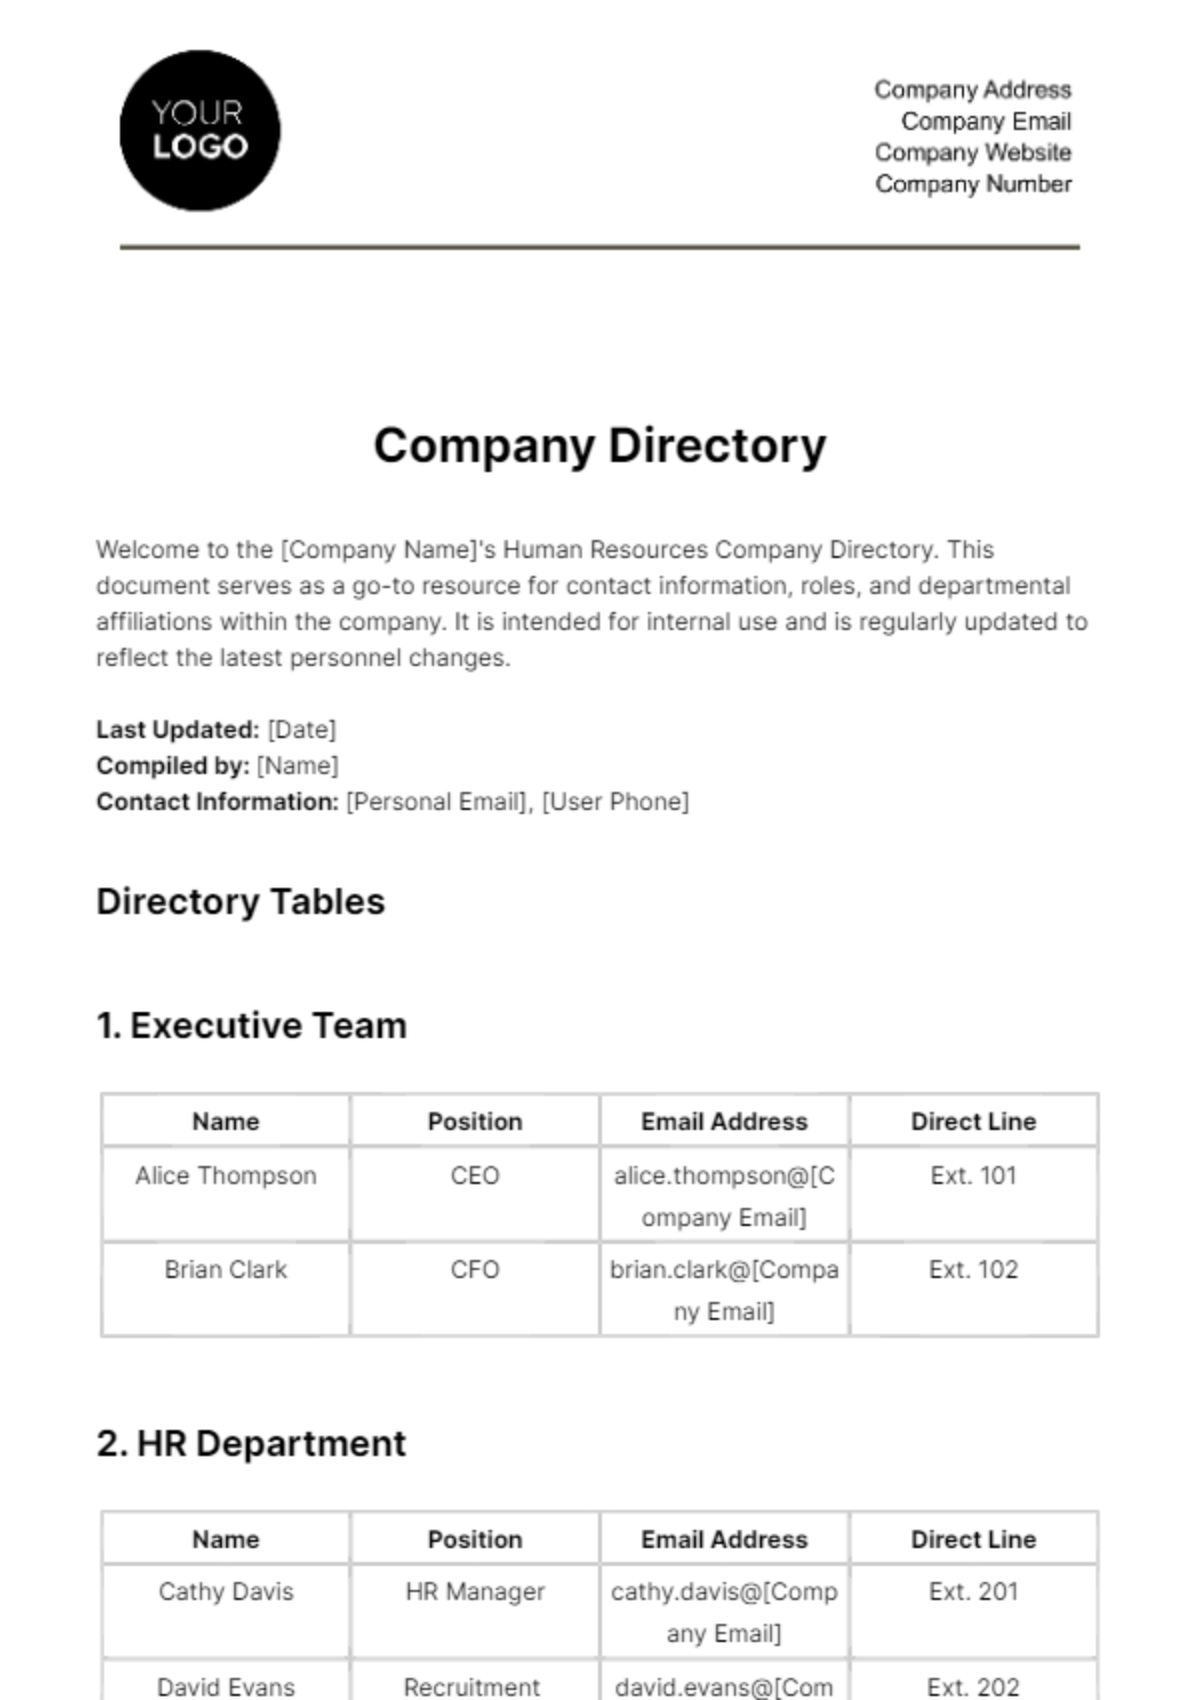 Company Directory HR Template